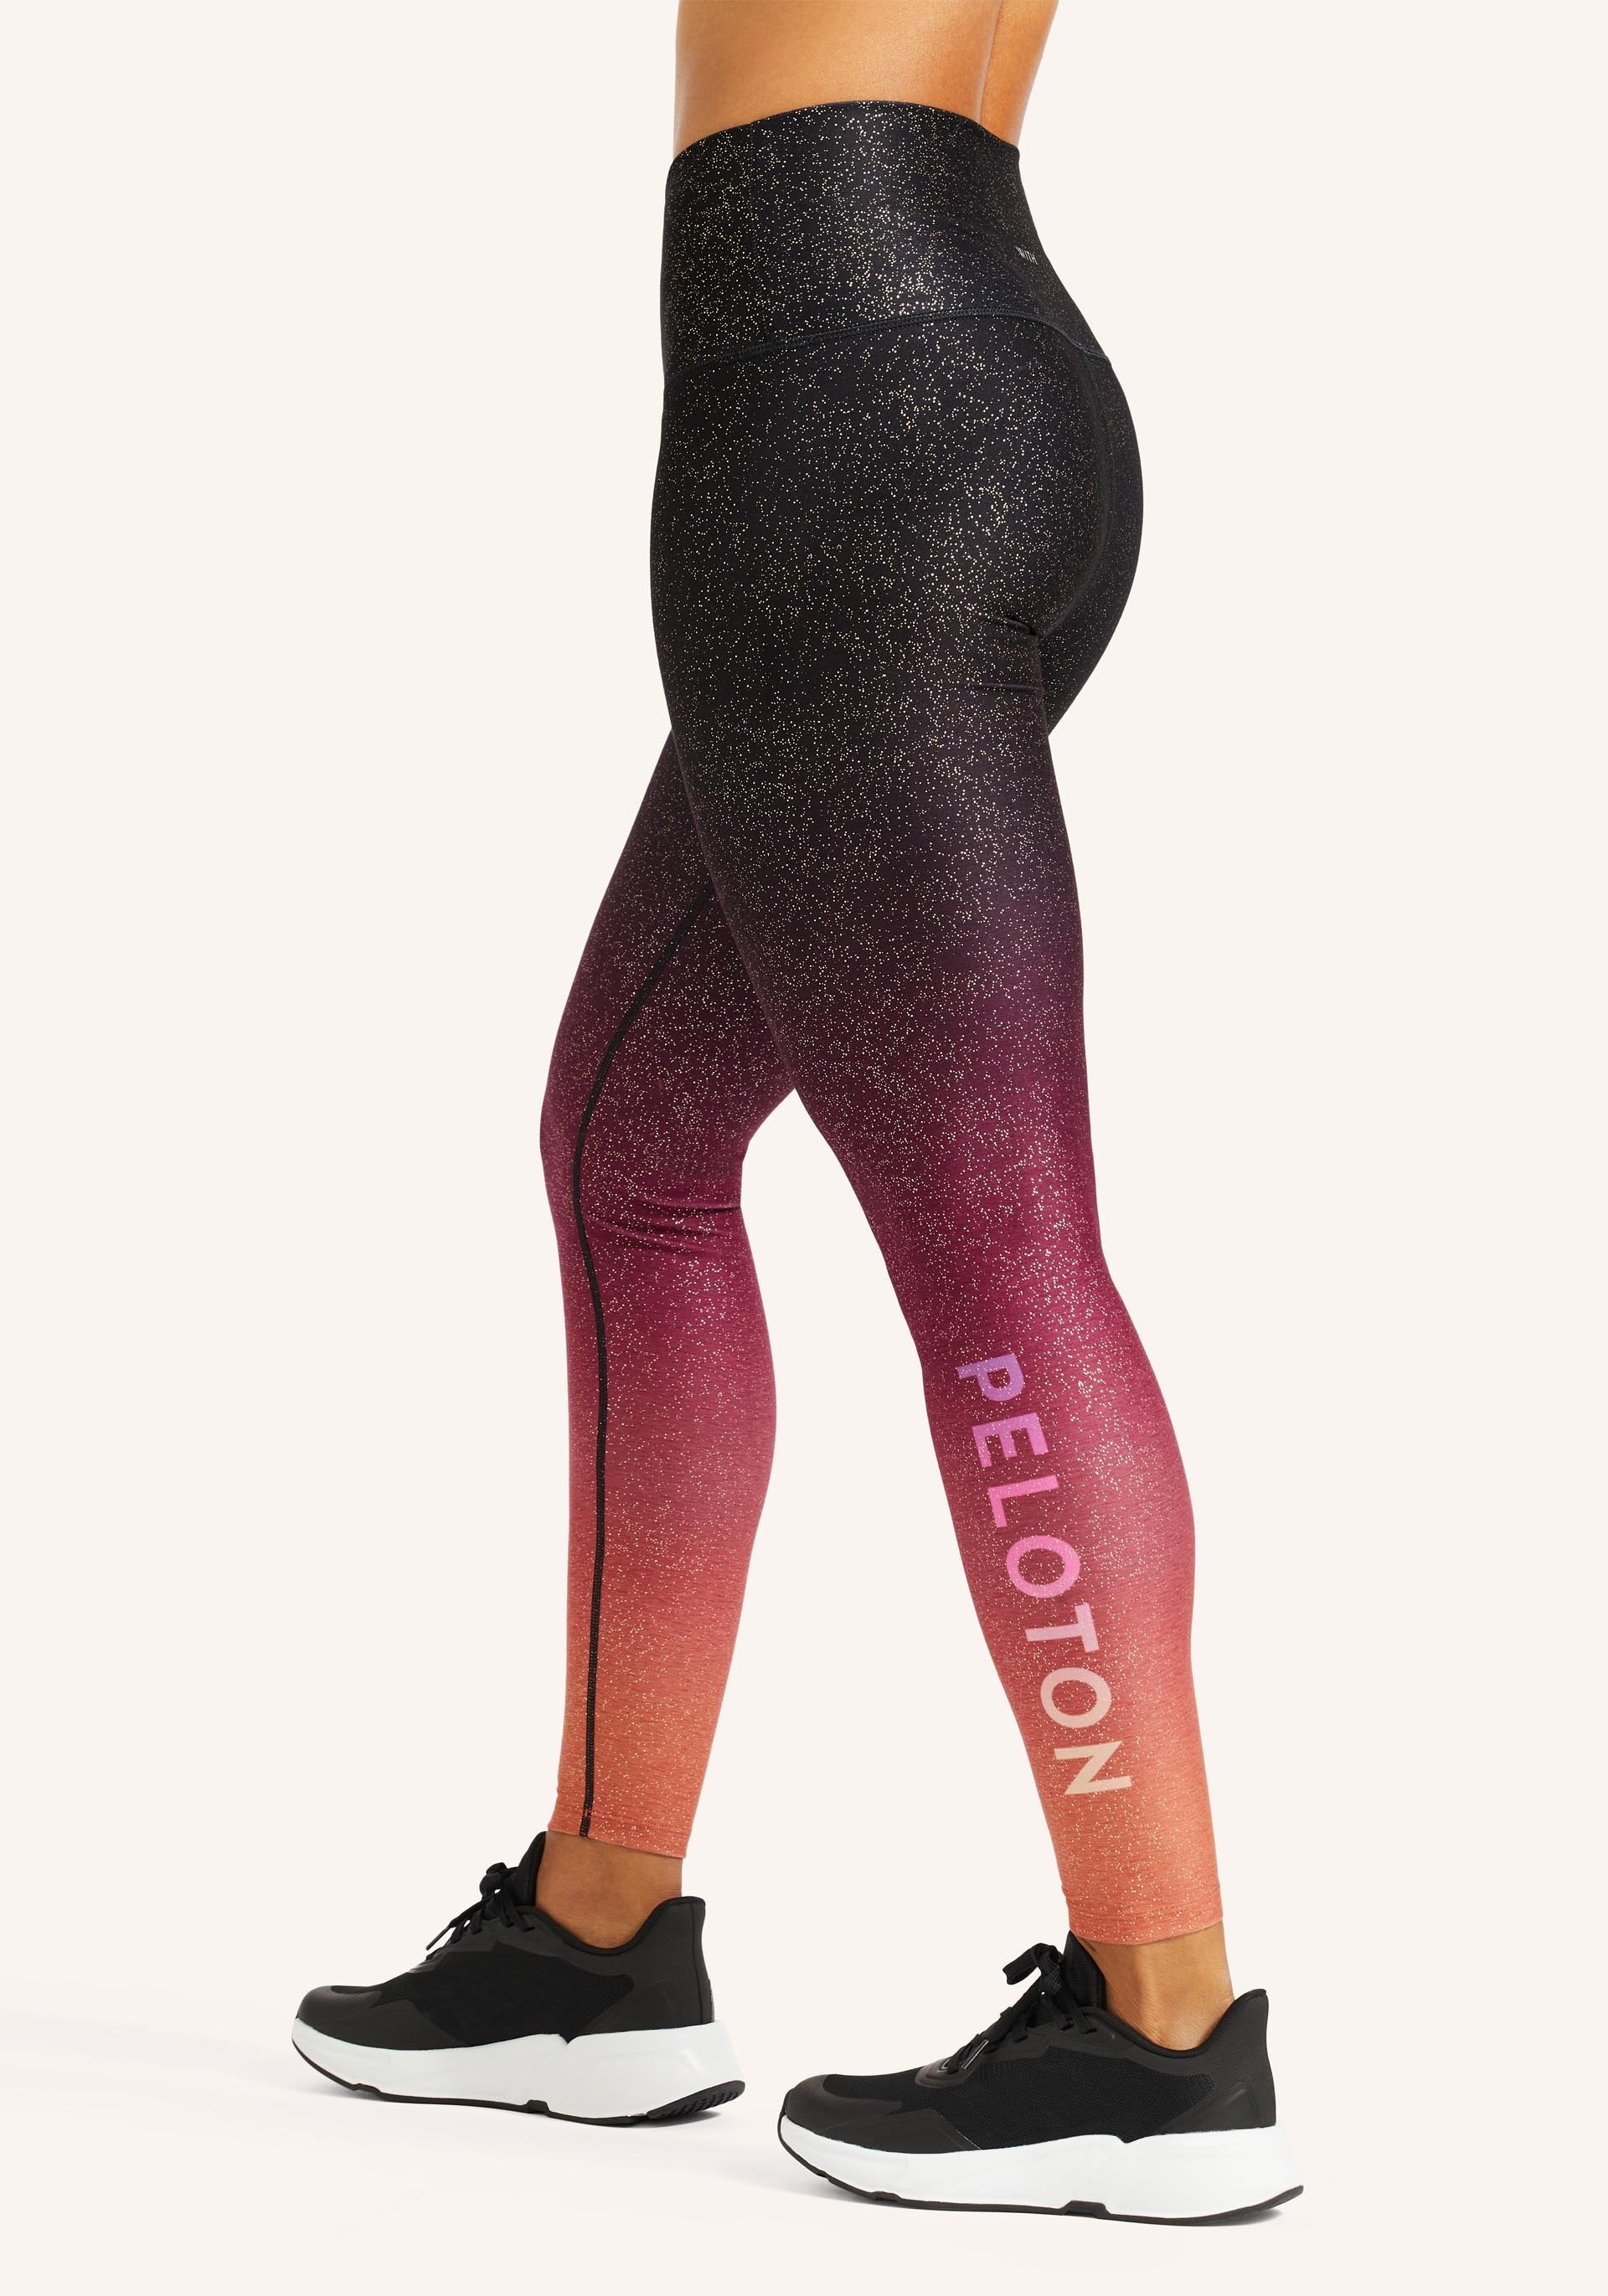 Peloton x WITH Women's Leggings Girls Night Out High Waisted Sparkle  Starlight